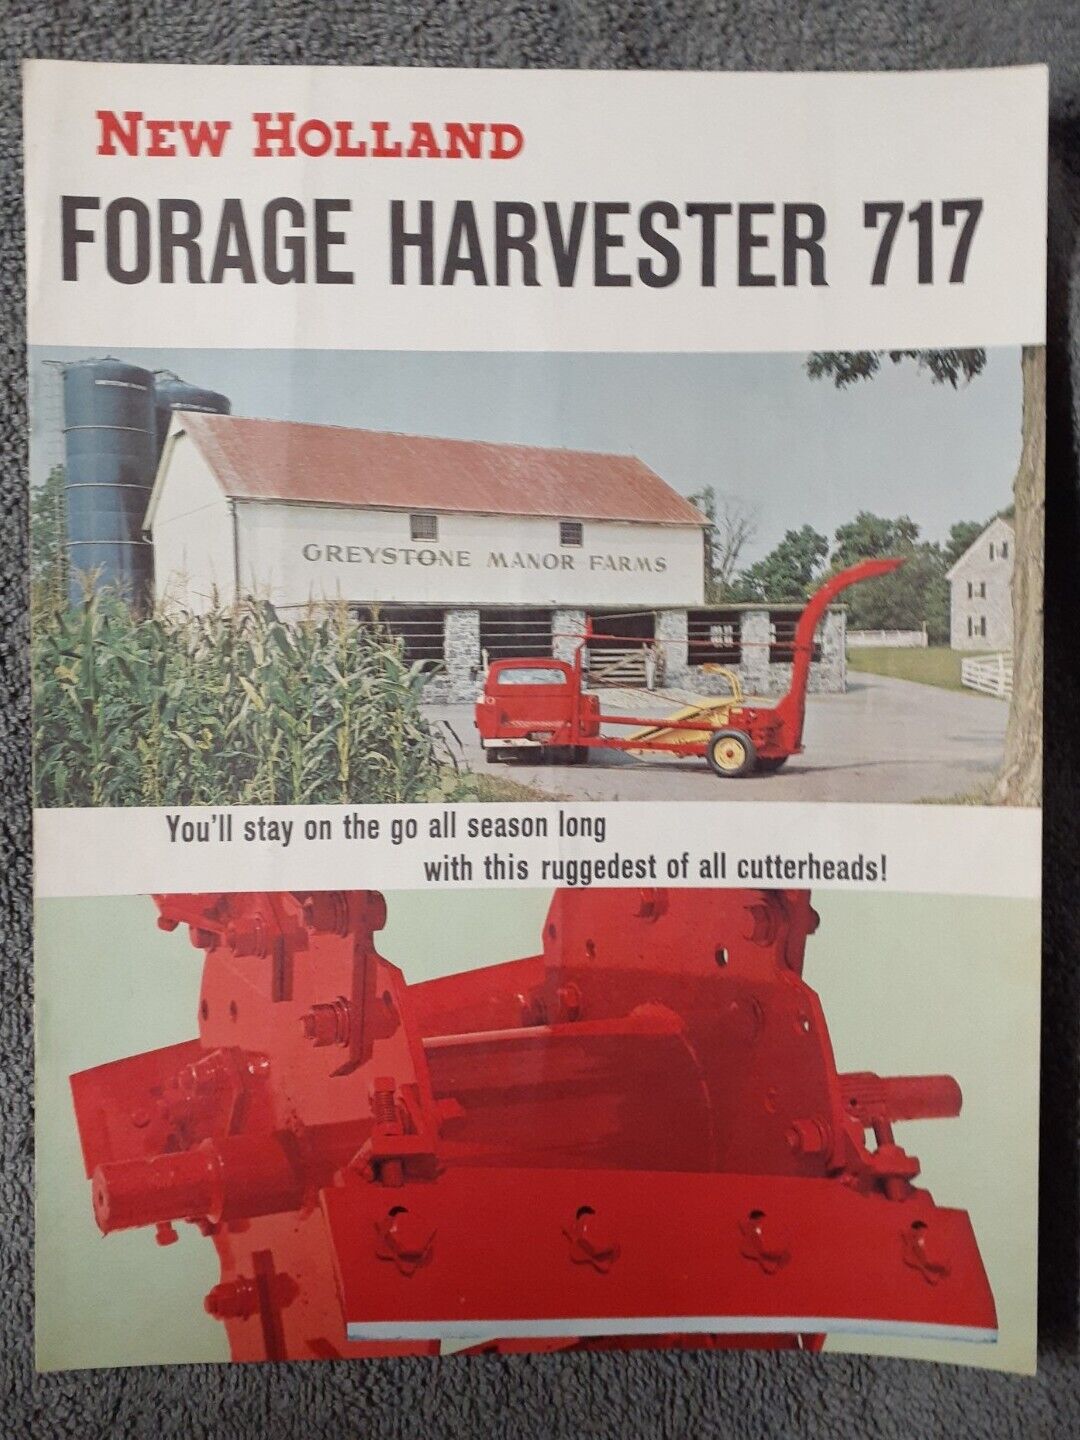 New Holland 717 Forage Harvester Fold-Out Brochure